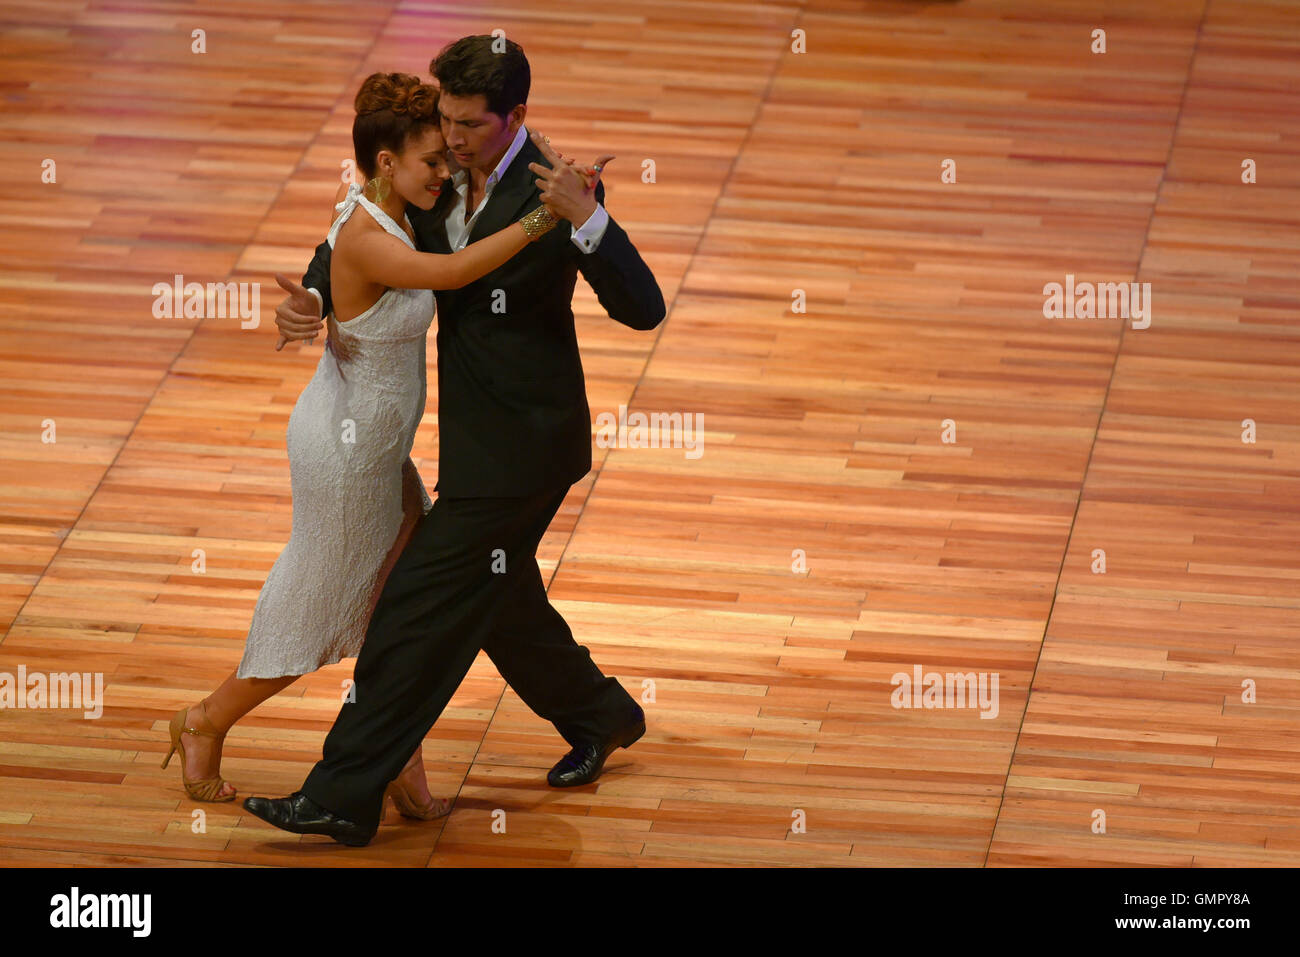 Buenos Aires, Argentina - 22 Aug 2016: Couple takes part in the round of the Tango, during the Tango Dance World Cup. Stock Photo